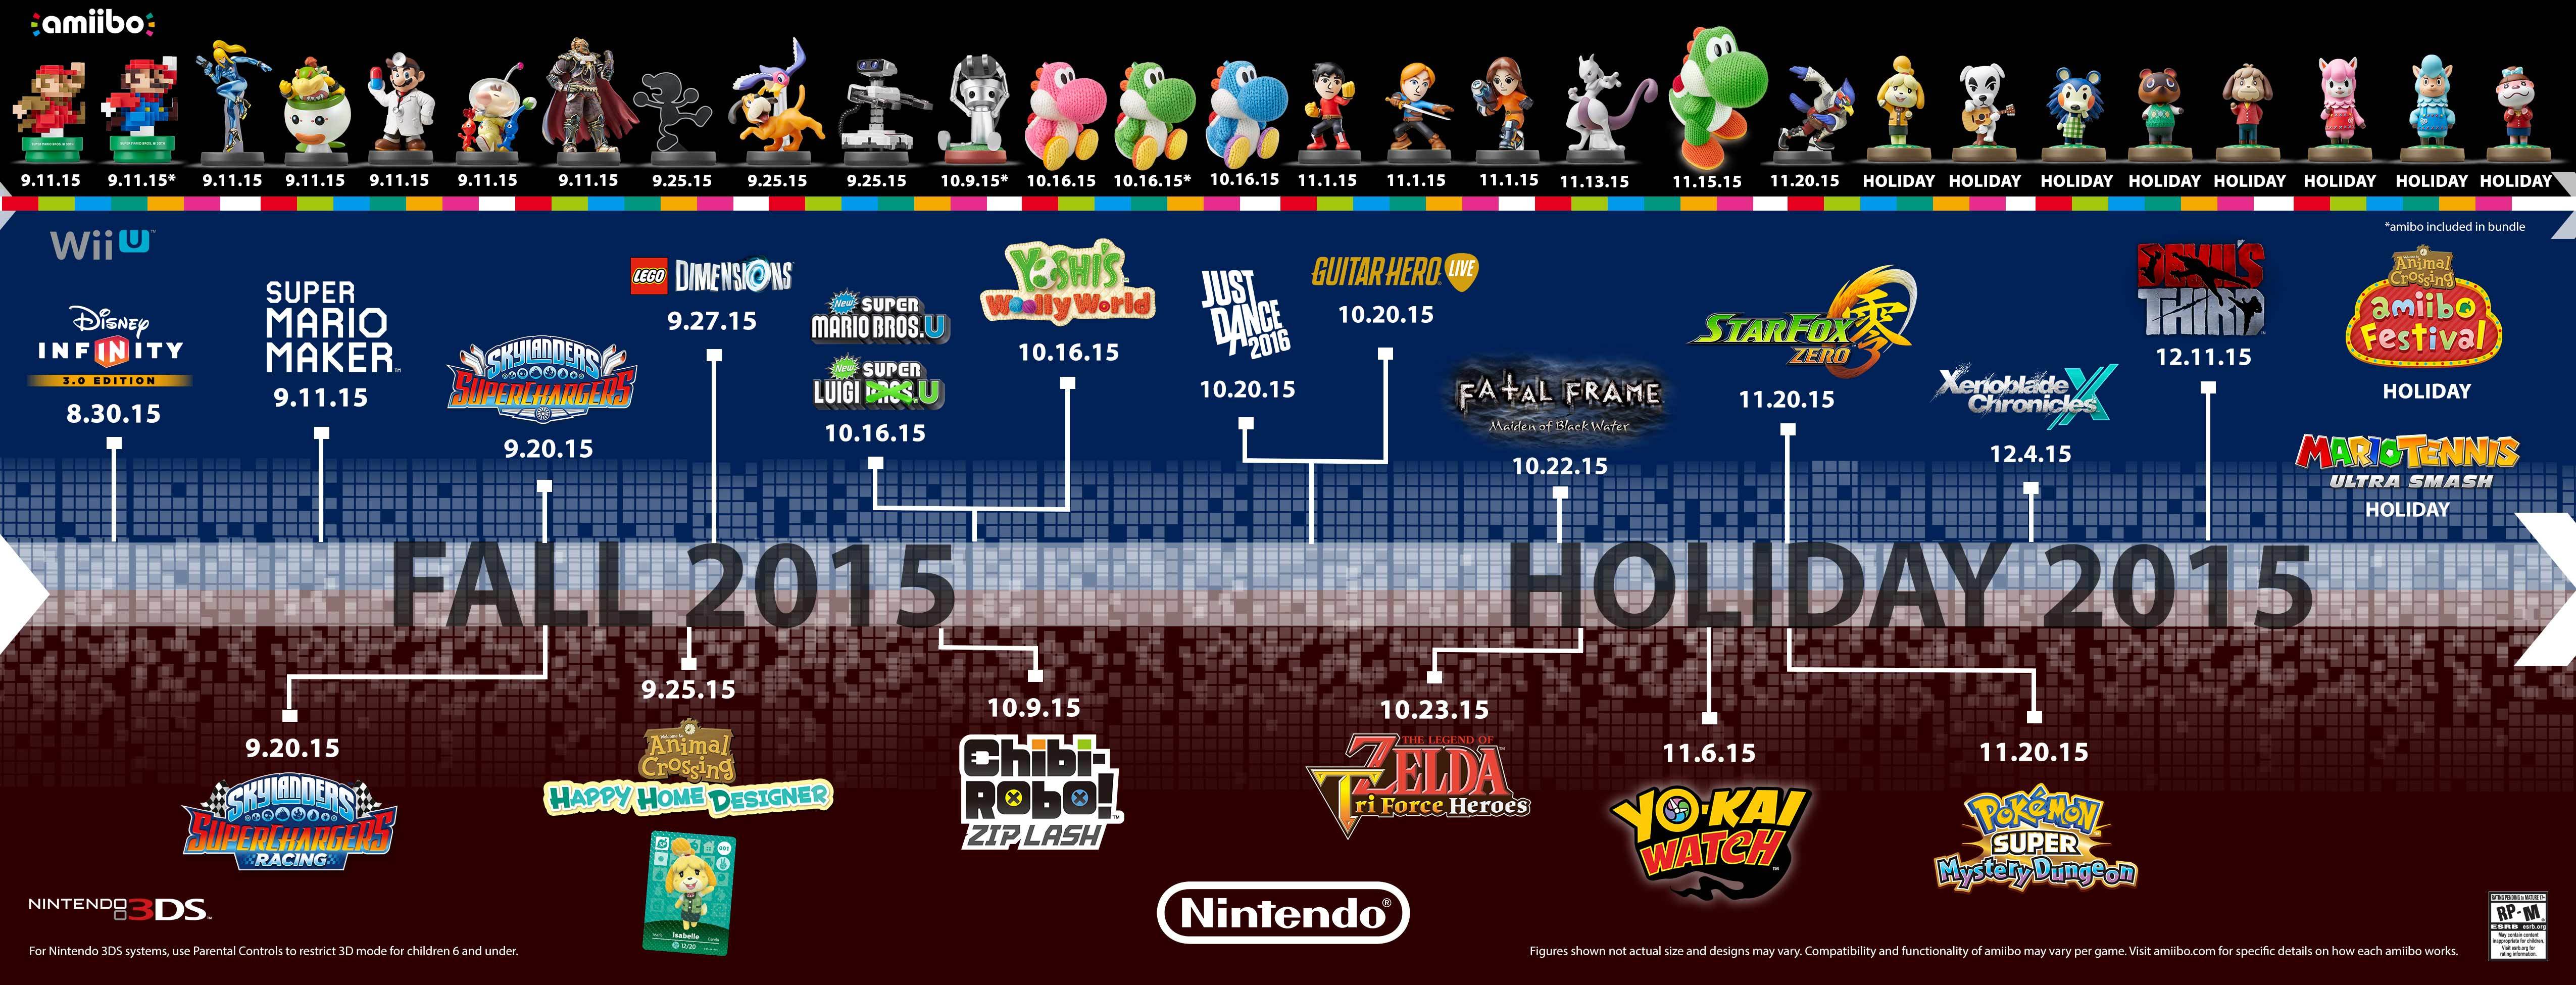 Nintendo Packs 2015 with a Huge Lineup of Games for Everyone